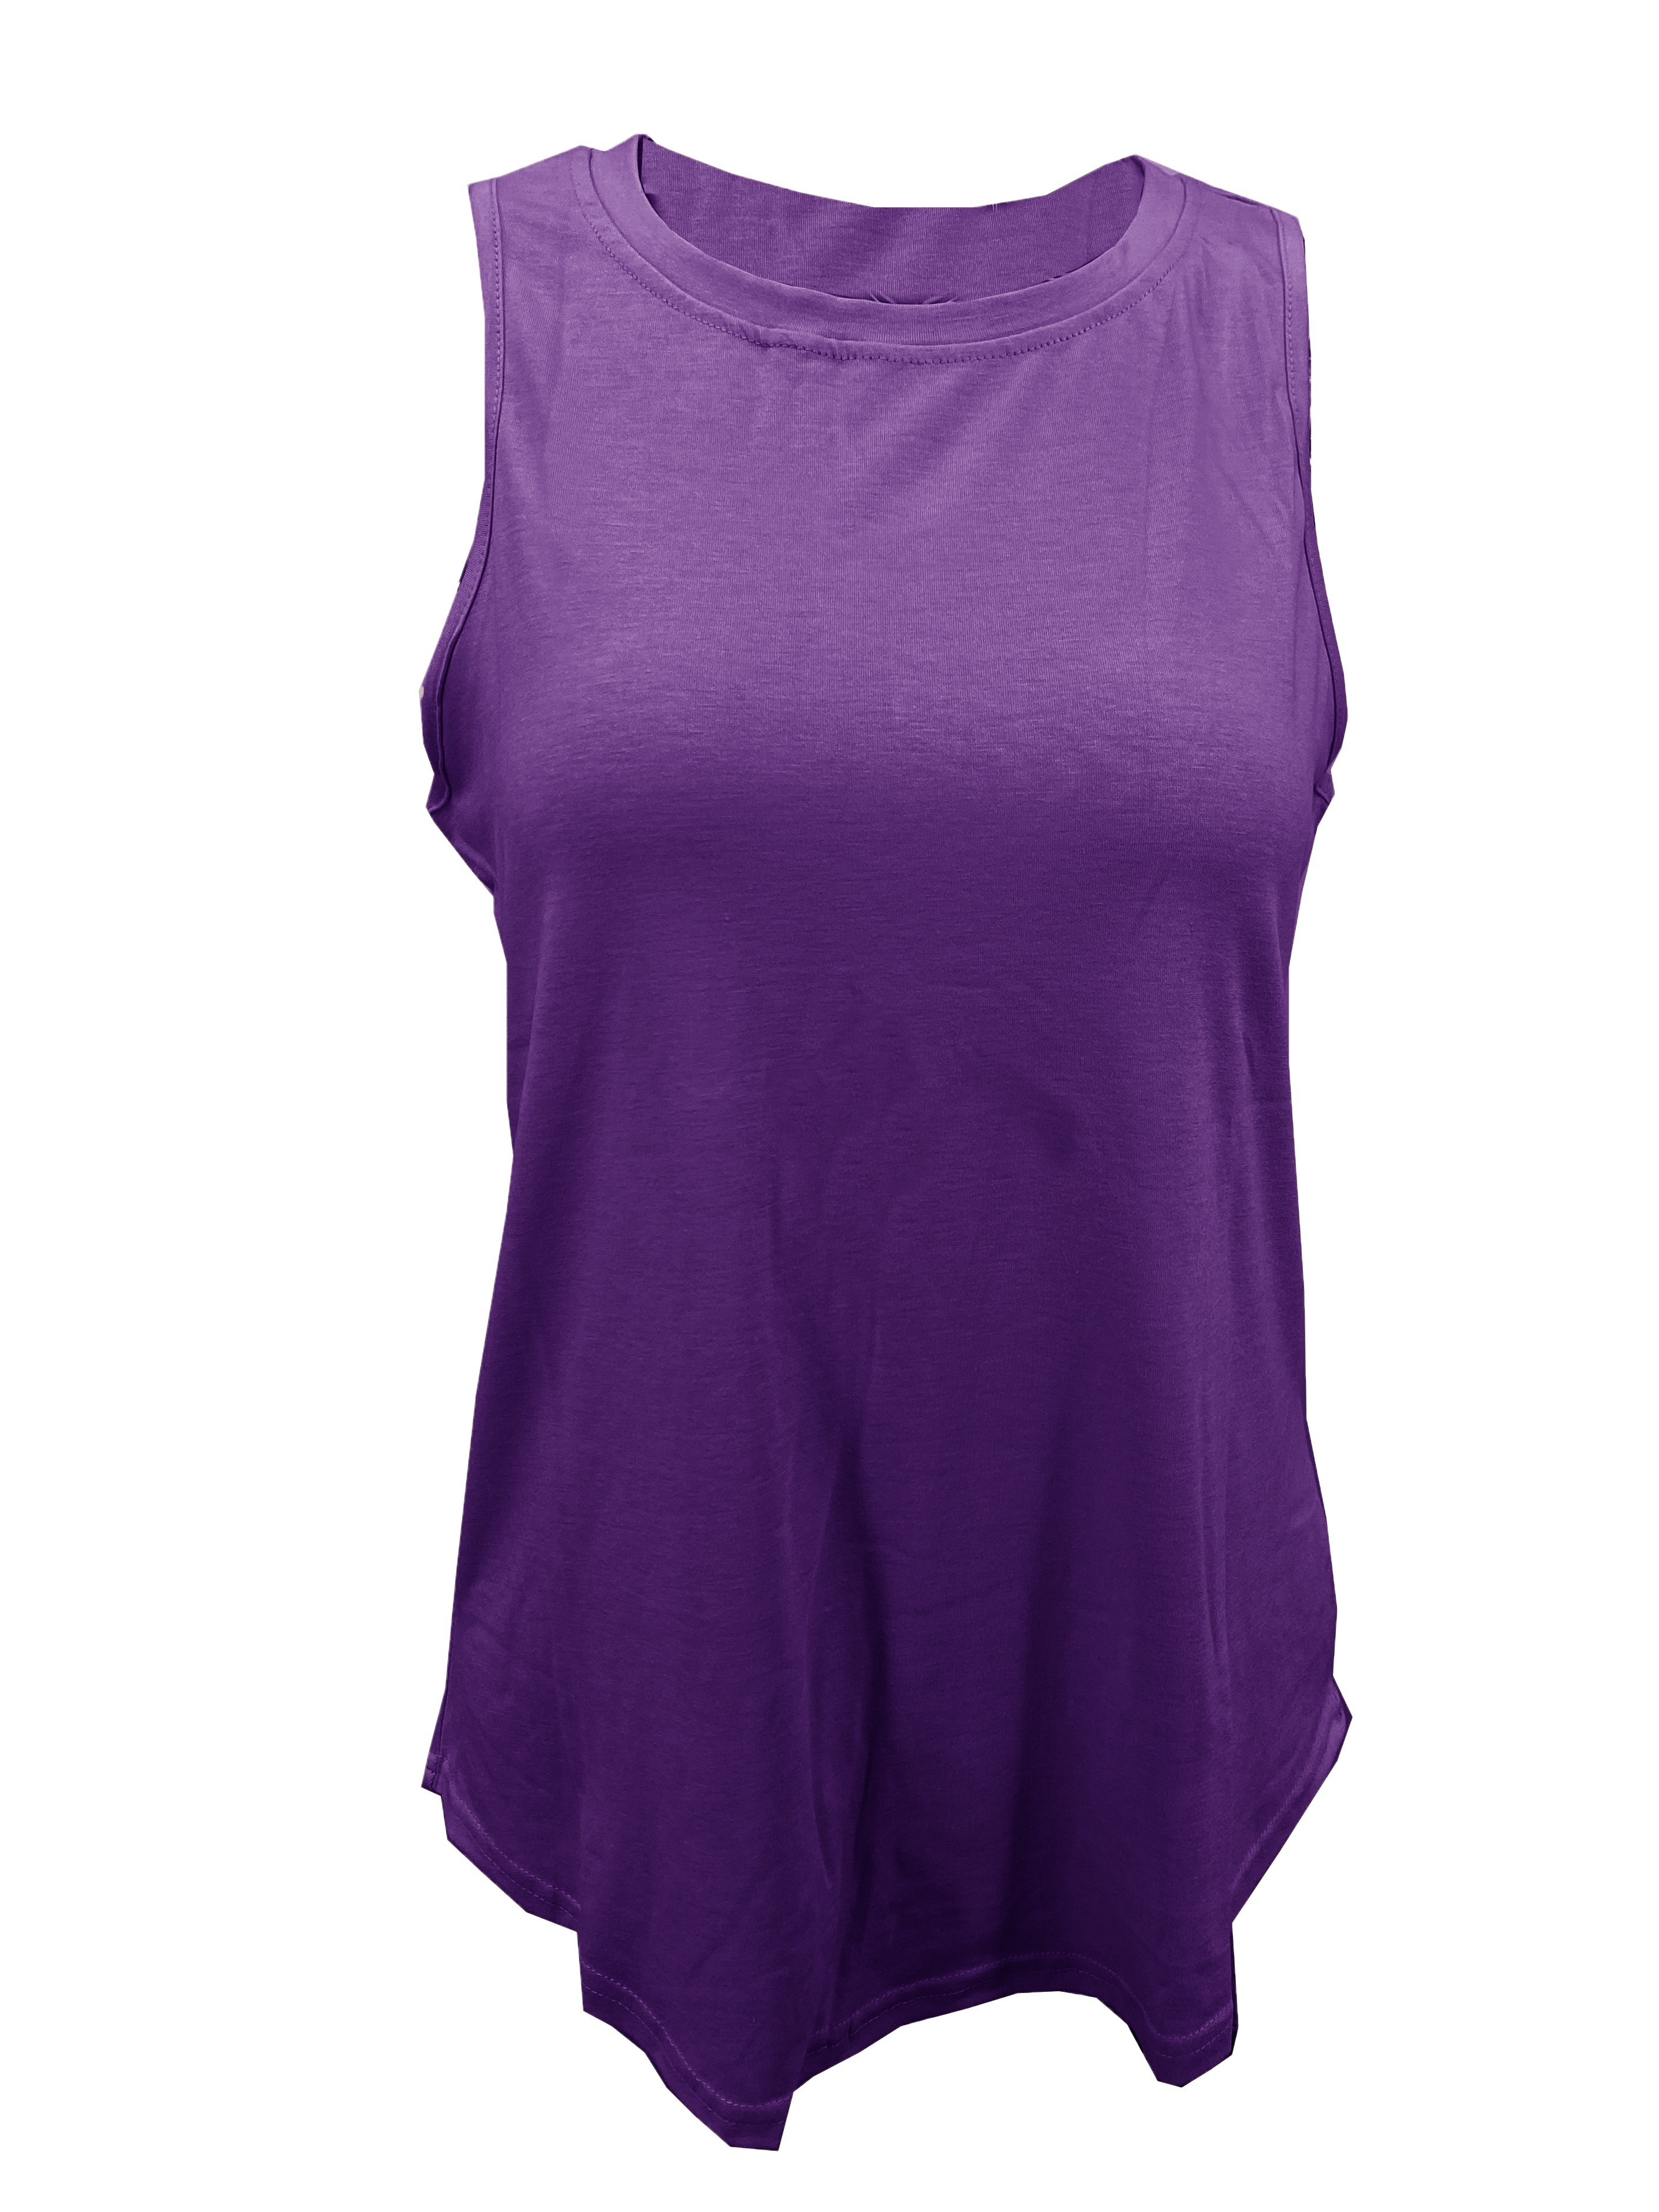 Vibe Tank Top - Solid Color Tank for Women